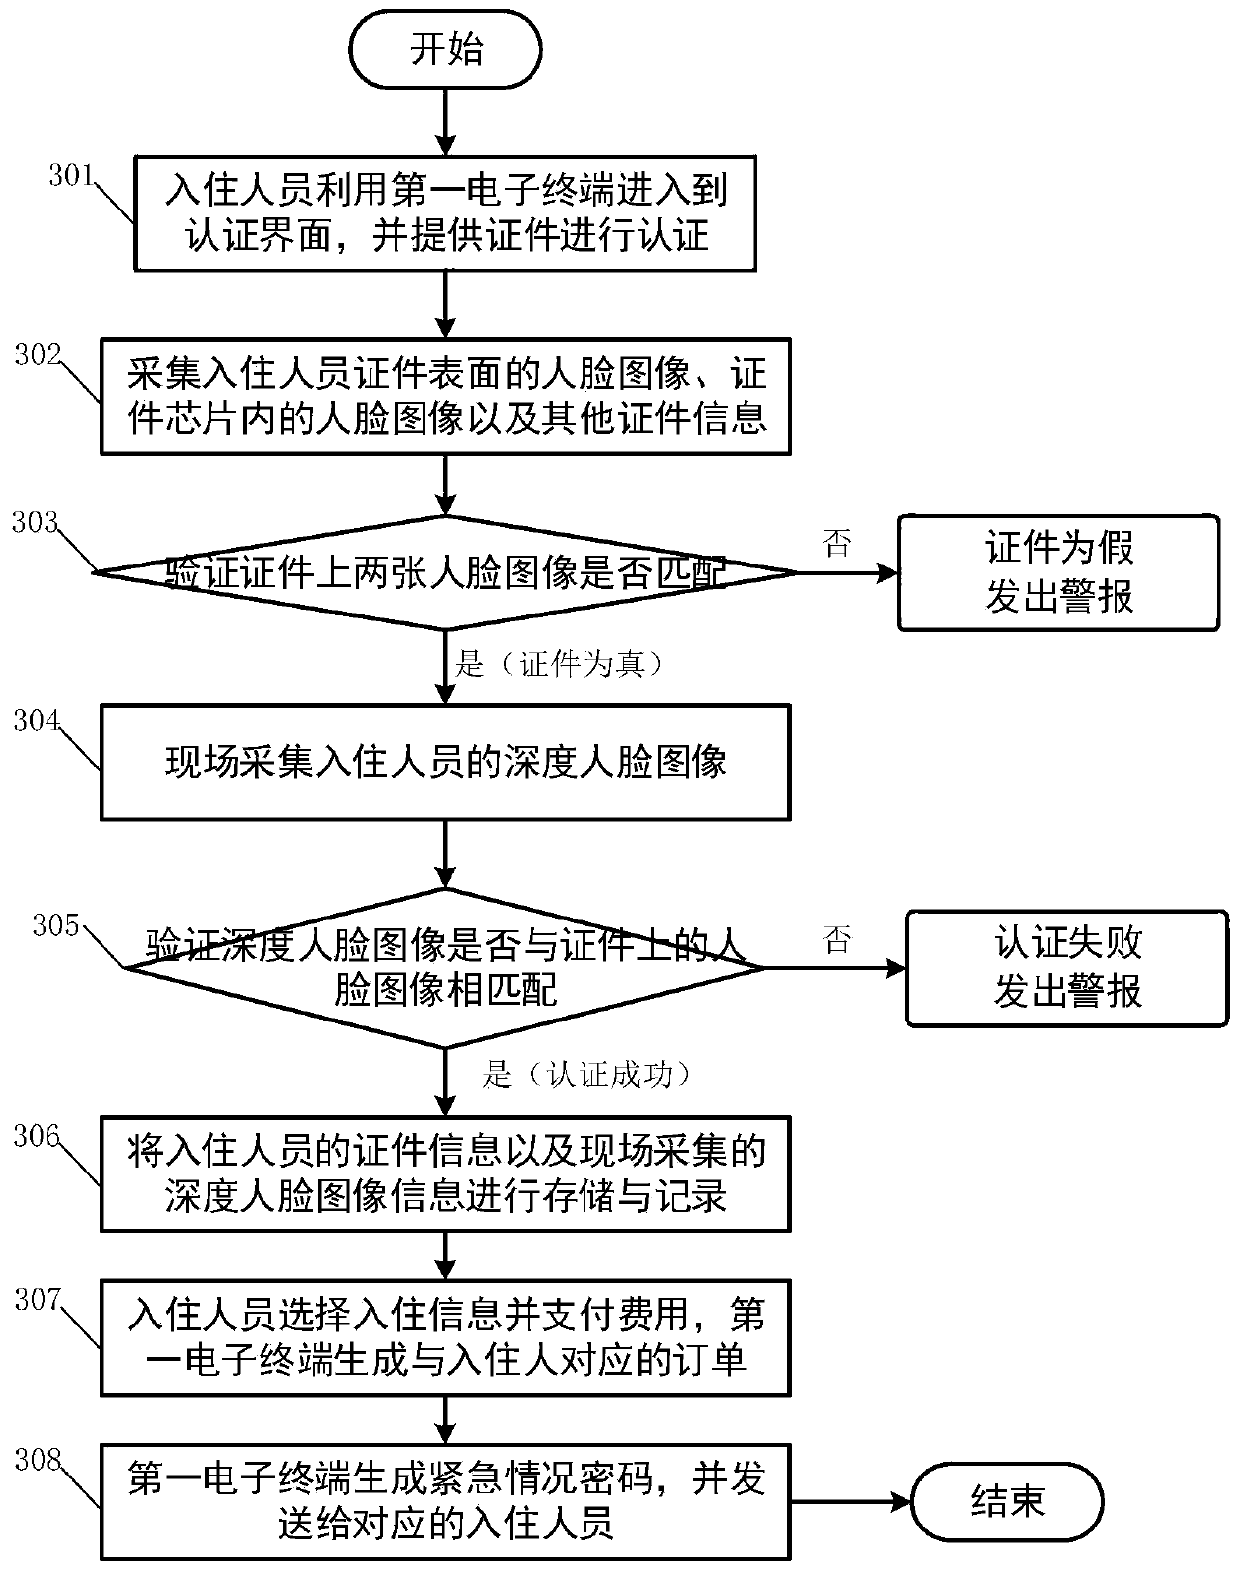 Unmanned hotel management authentication method and device